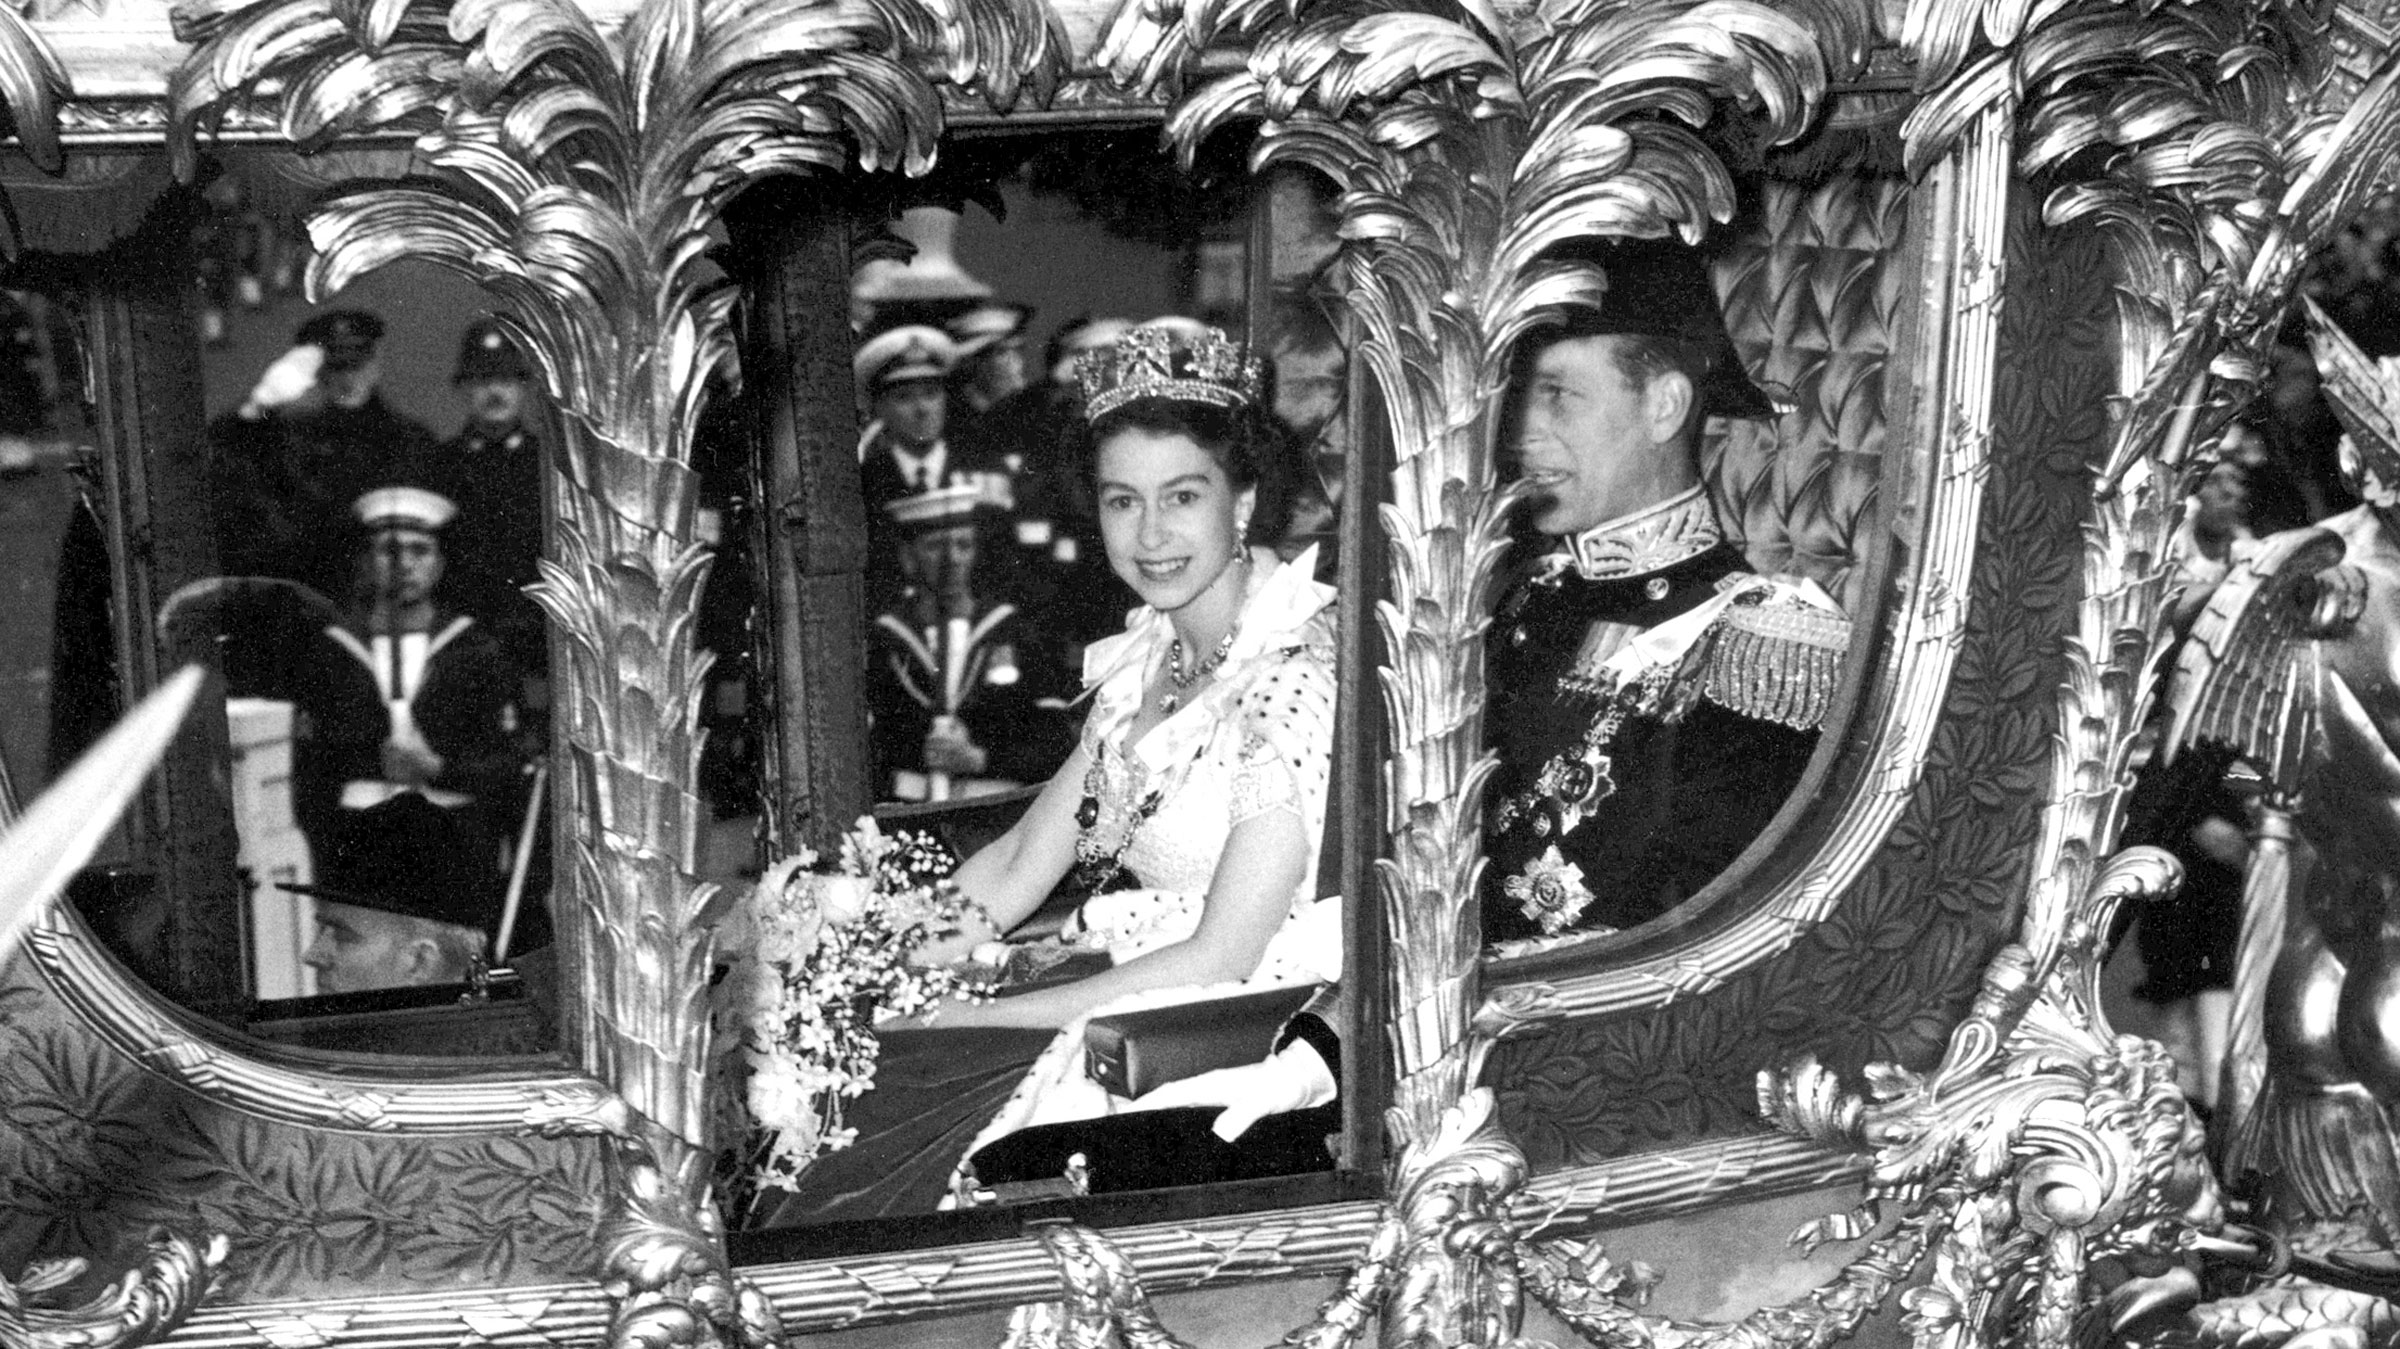 Britain's Queen Elizabeth II — with her husband, Philip — travels to her coronation ceremony in London on June 2, 1953. She ascended to the throne a year earlier, when her father died of lung cancer in February 1952. She was 25 at the time.